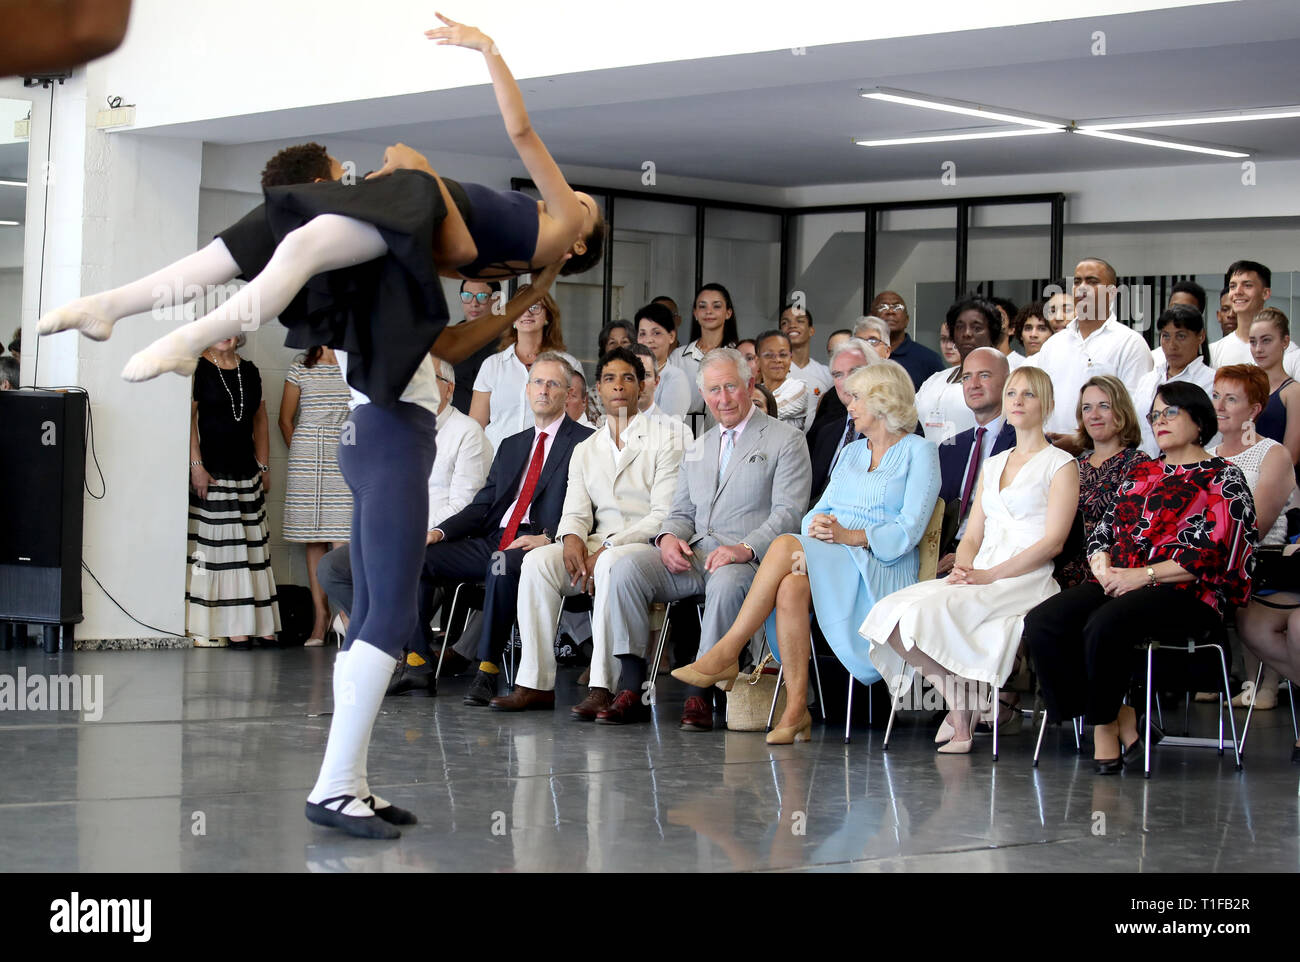 The Prince of Wales and The Duchess of Cornwall, with founder and director Carlos Acosta, watch a performance during a visit to the Acosta Dance Company in Havana, Cuba. Stock Photo